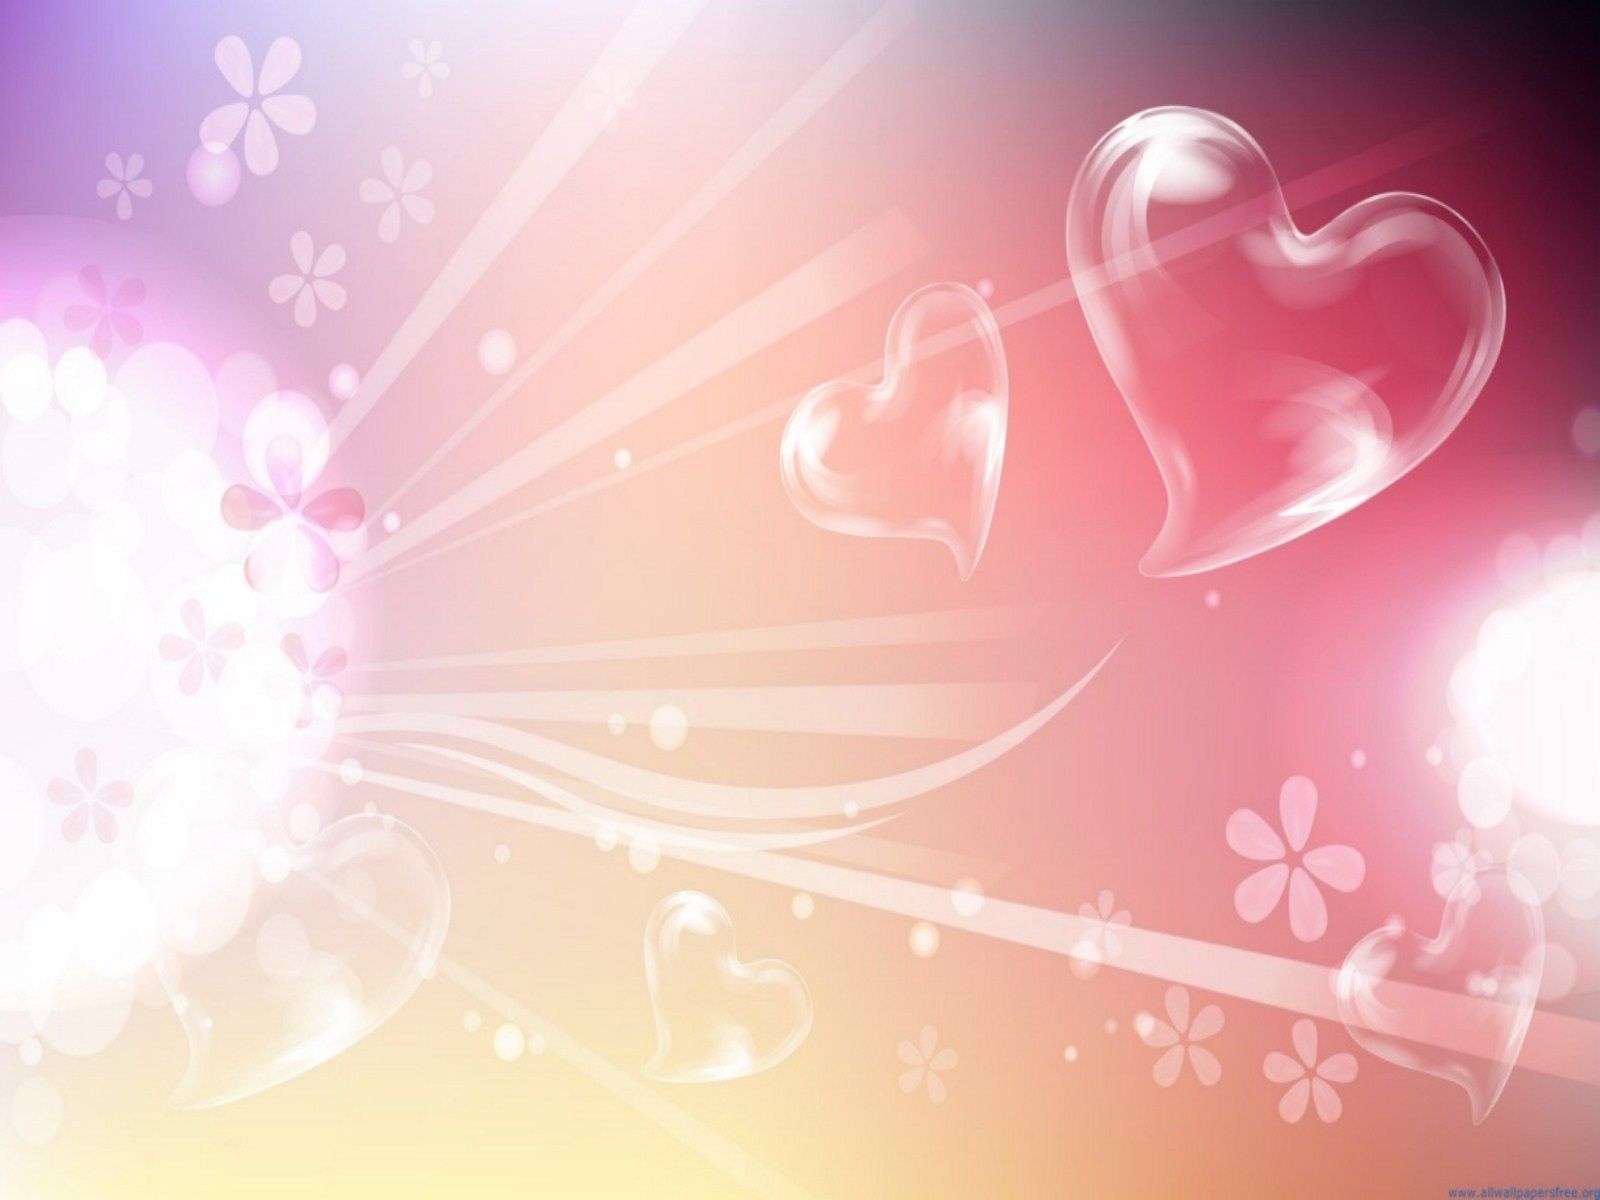 Google Image Valentine Wallpaper In Collection